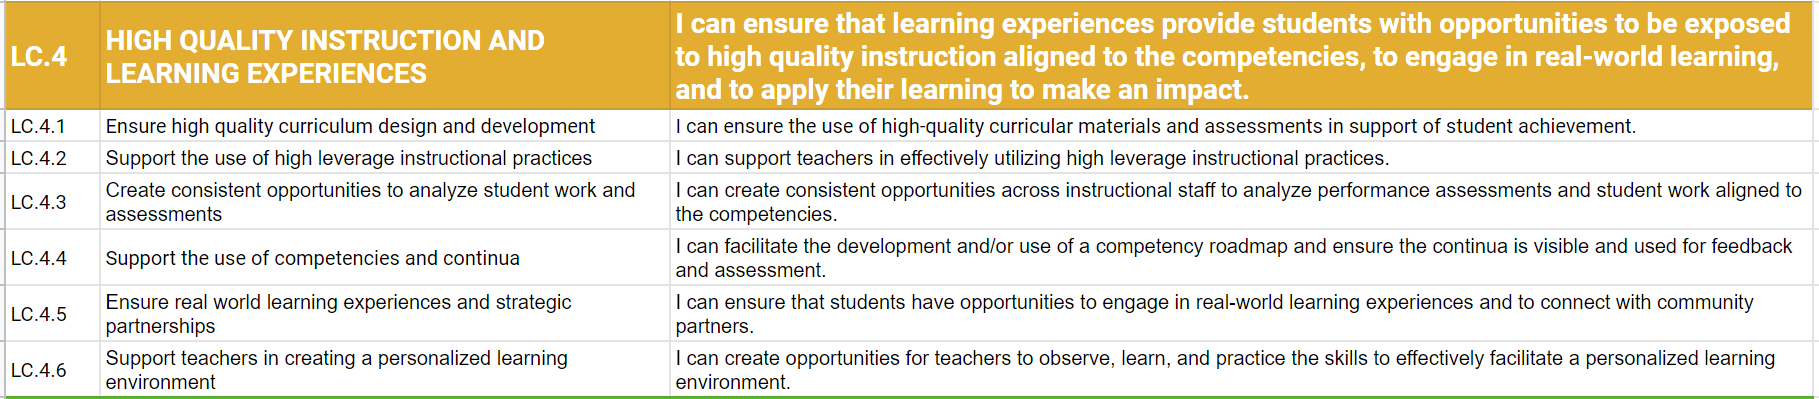 Table Showing Aspects of Leader Competency #4 -- High Quality Instruction and Learning Experiences